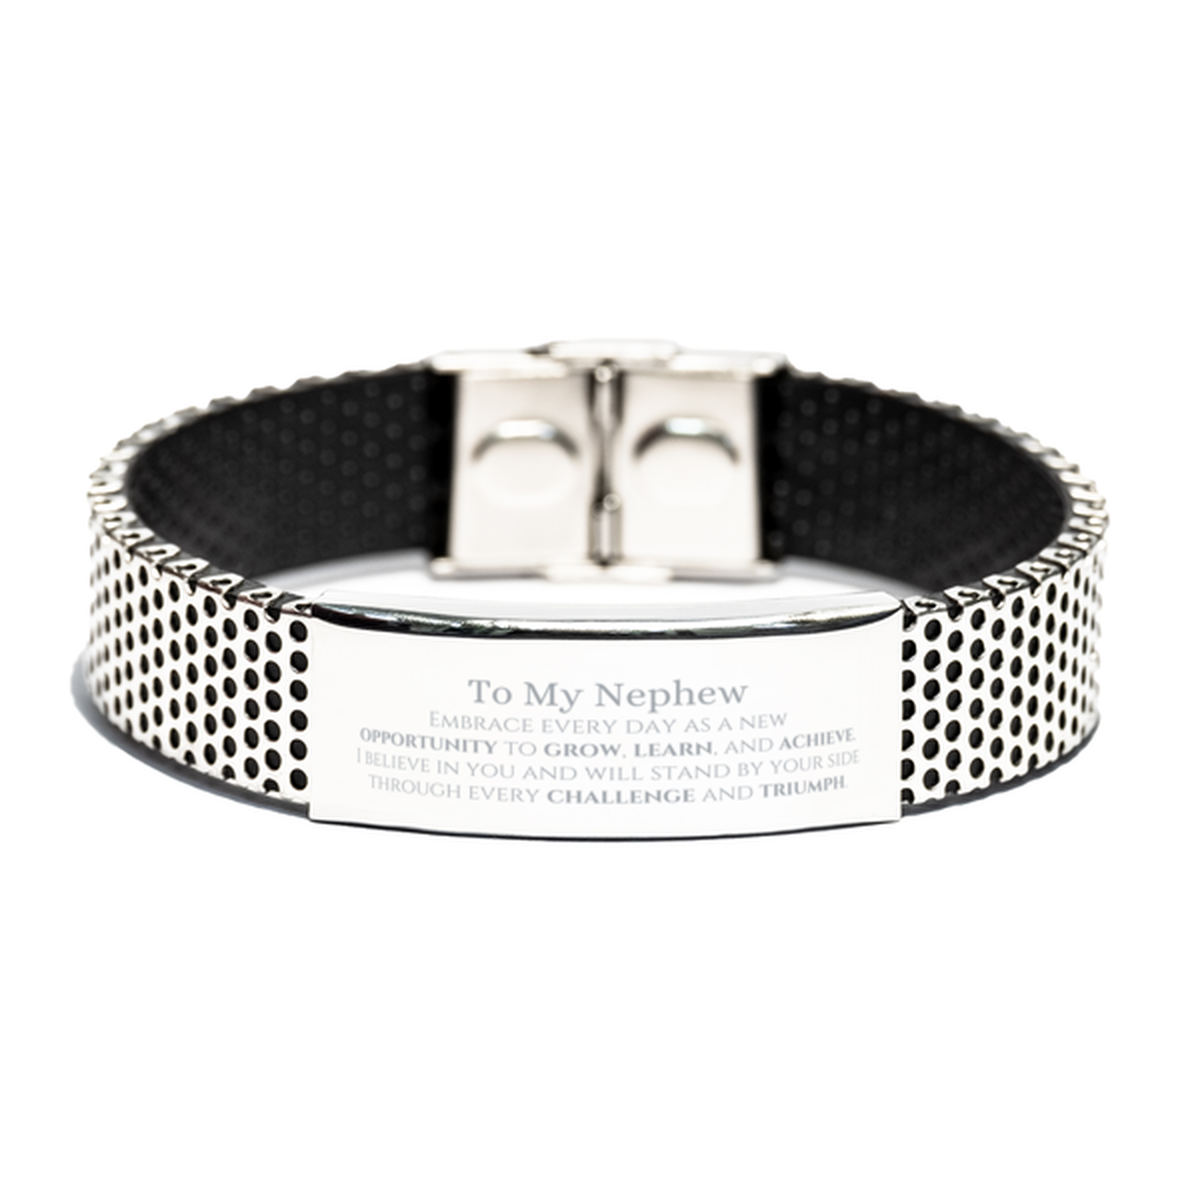 To My Nephew Gifts, I believe in you and will stand by your side, Inspirational Stainless Steel Bracelet For Nephew, Birthday Christmas Motivational Nephew Gifts